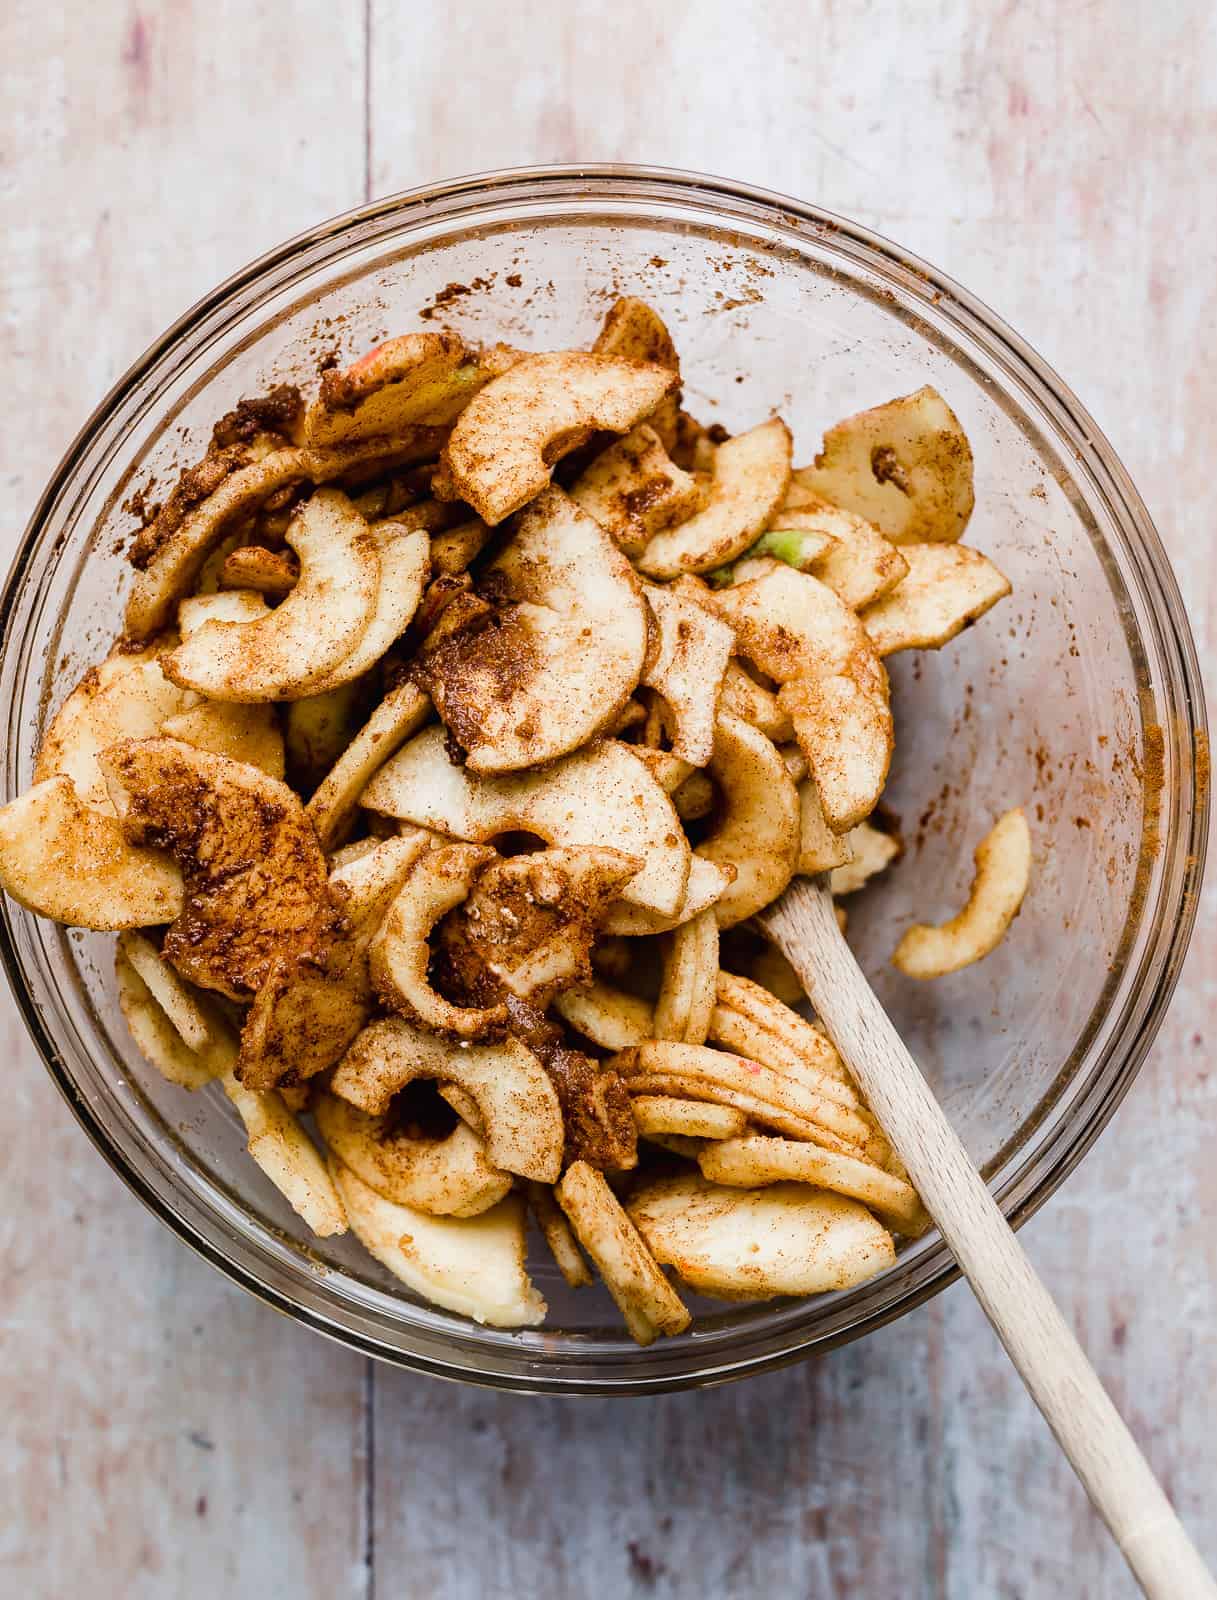 Glass bowl full of sliced apples tossed in brown sugar and ground cinnamon.